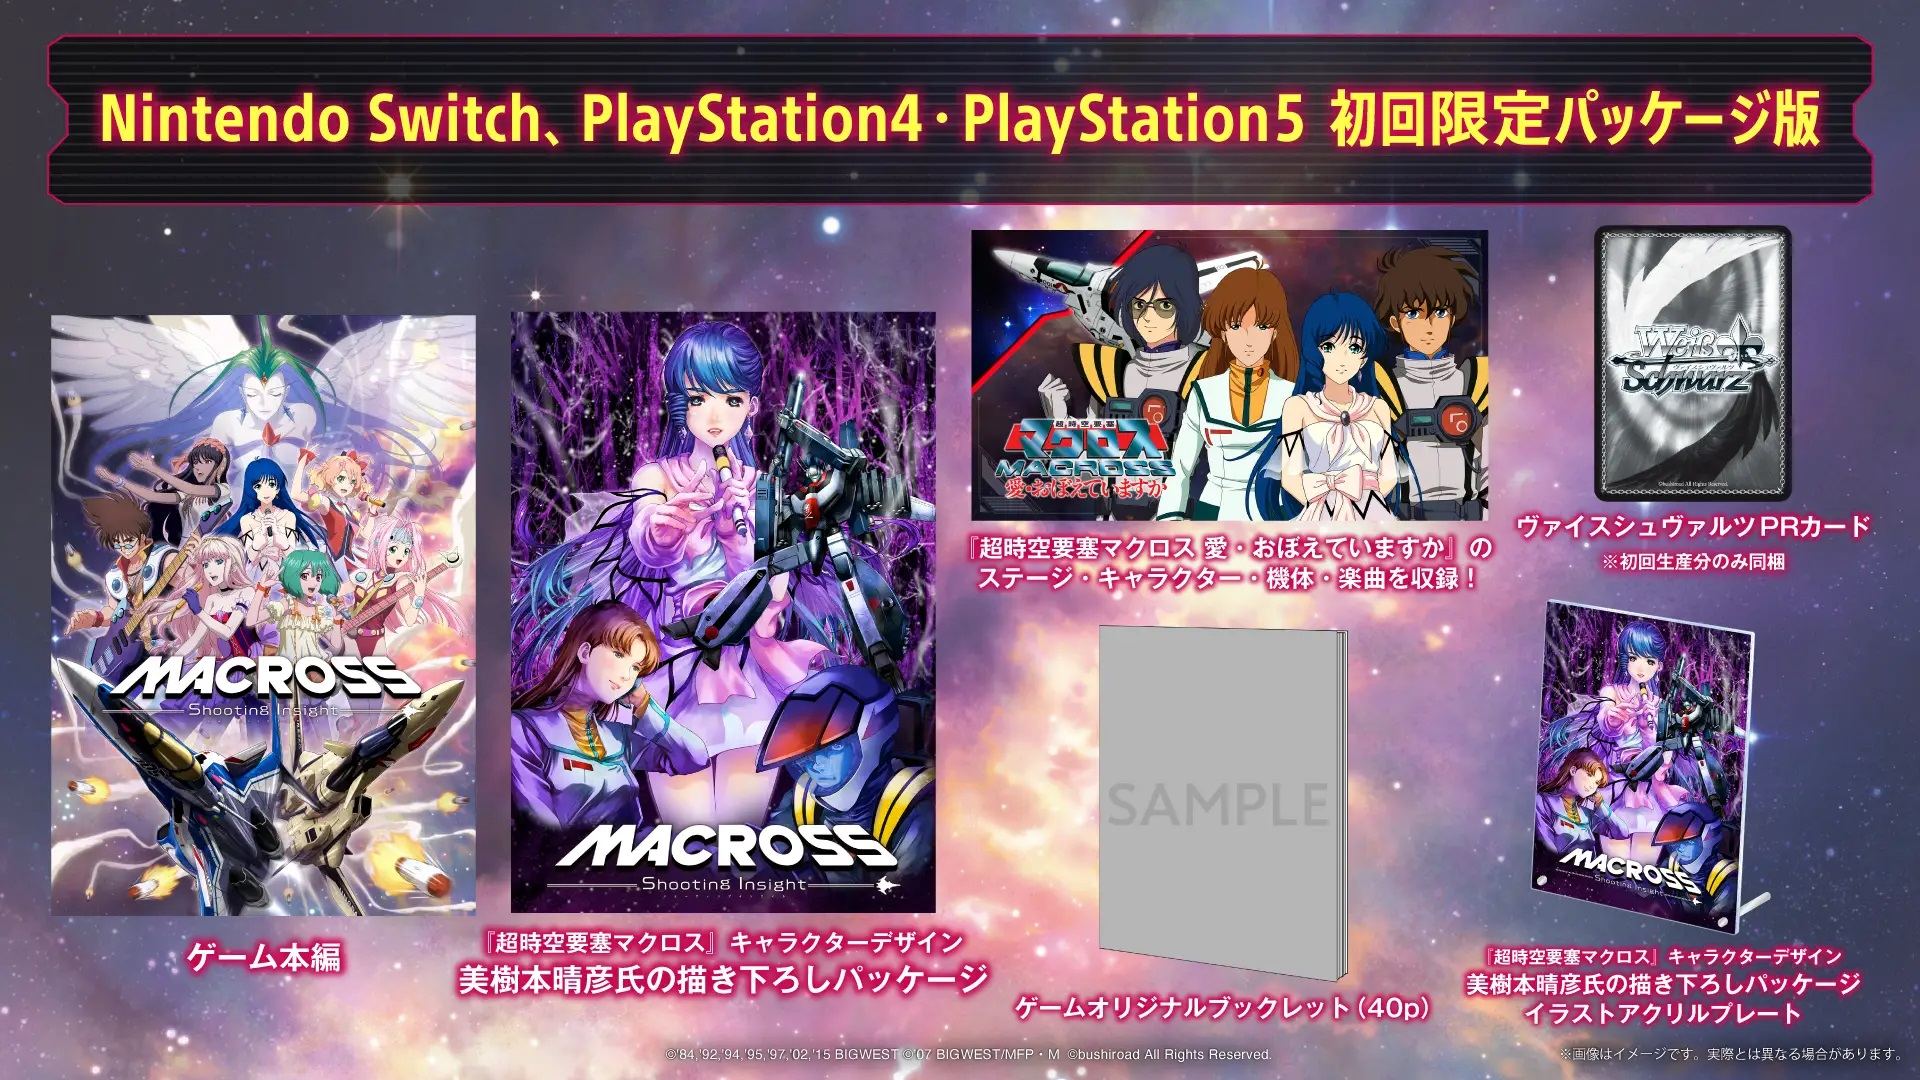 Macross: Shooting Insight [Limited Edition] for PlayStation 4